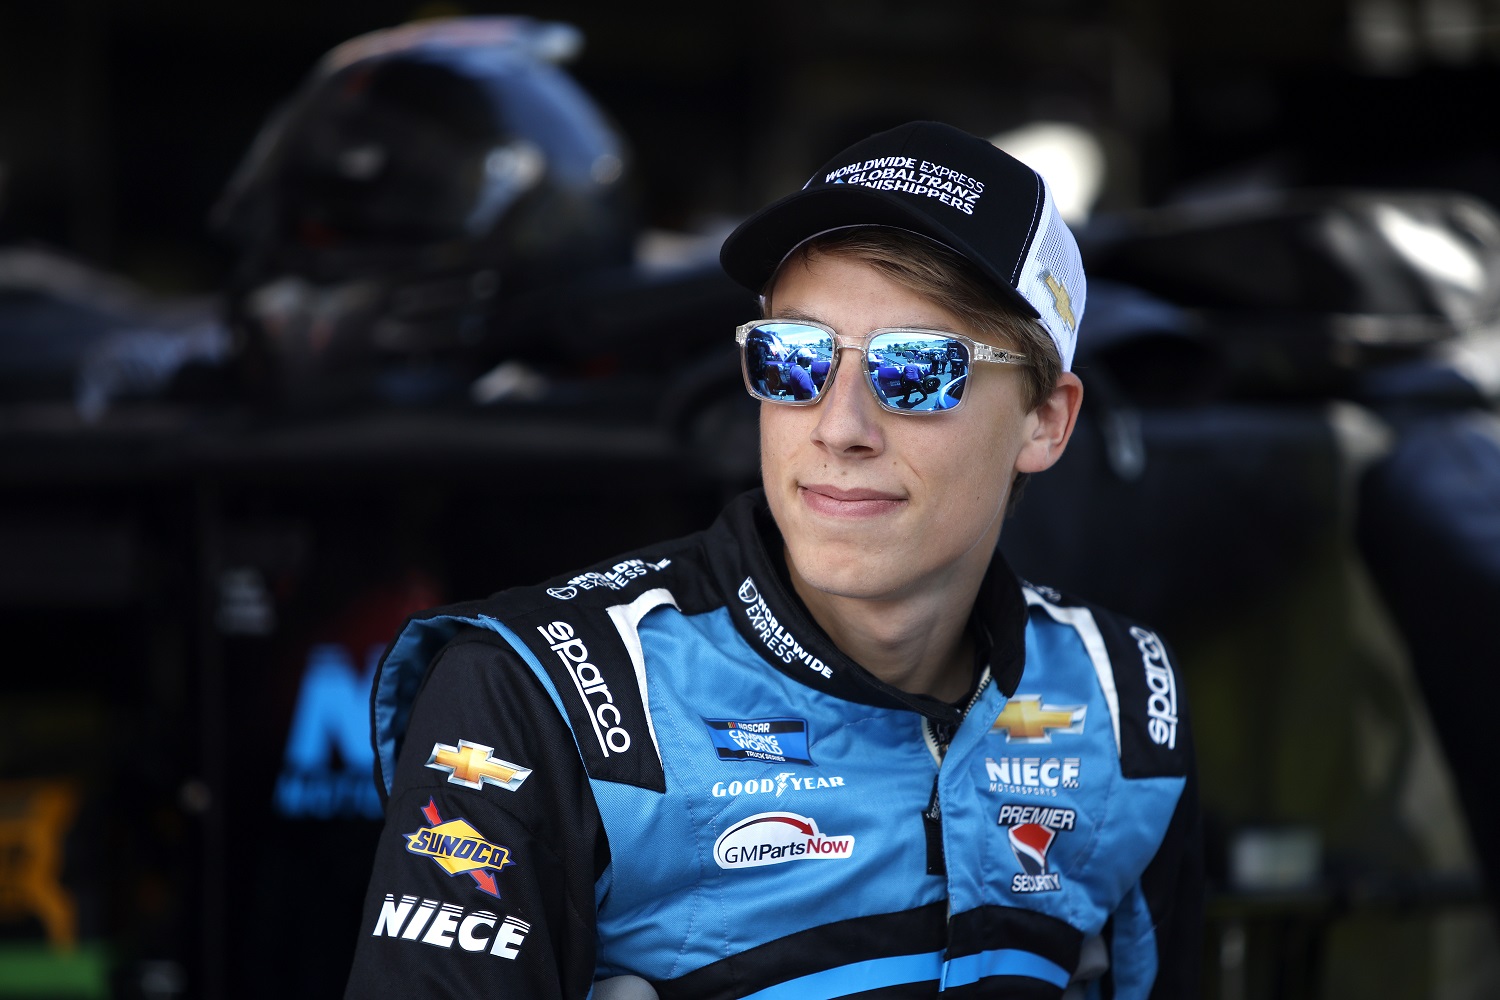 Carson Hocevar waits in the garage area during practice for the NASCAR Camping World Truck Series DoorDash 250 at Sonoma Raceway on June 10, 2022. | Sean Gardner/Getty Images